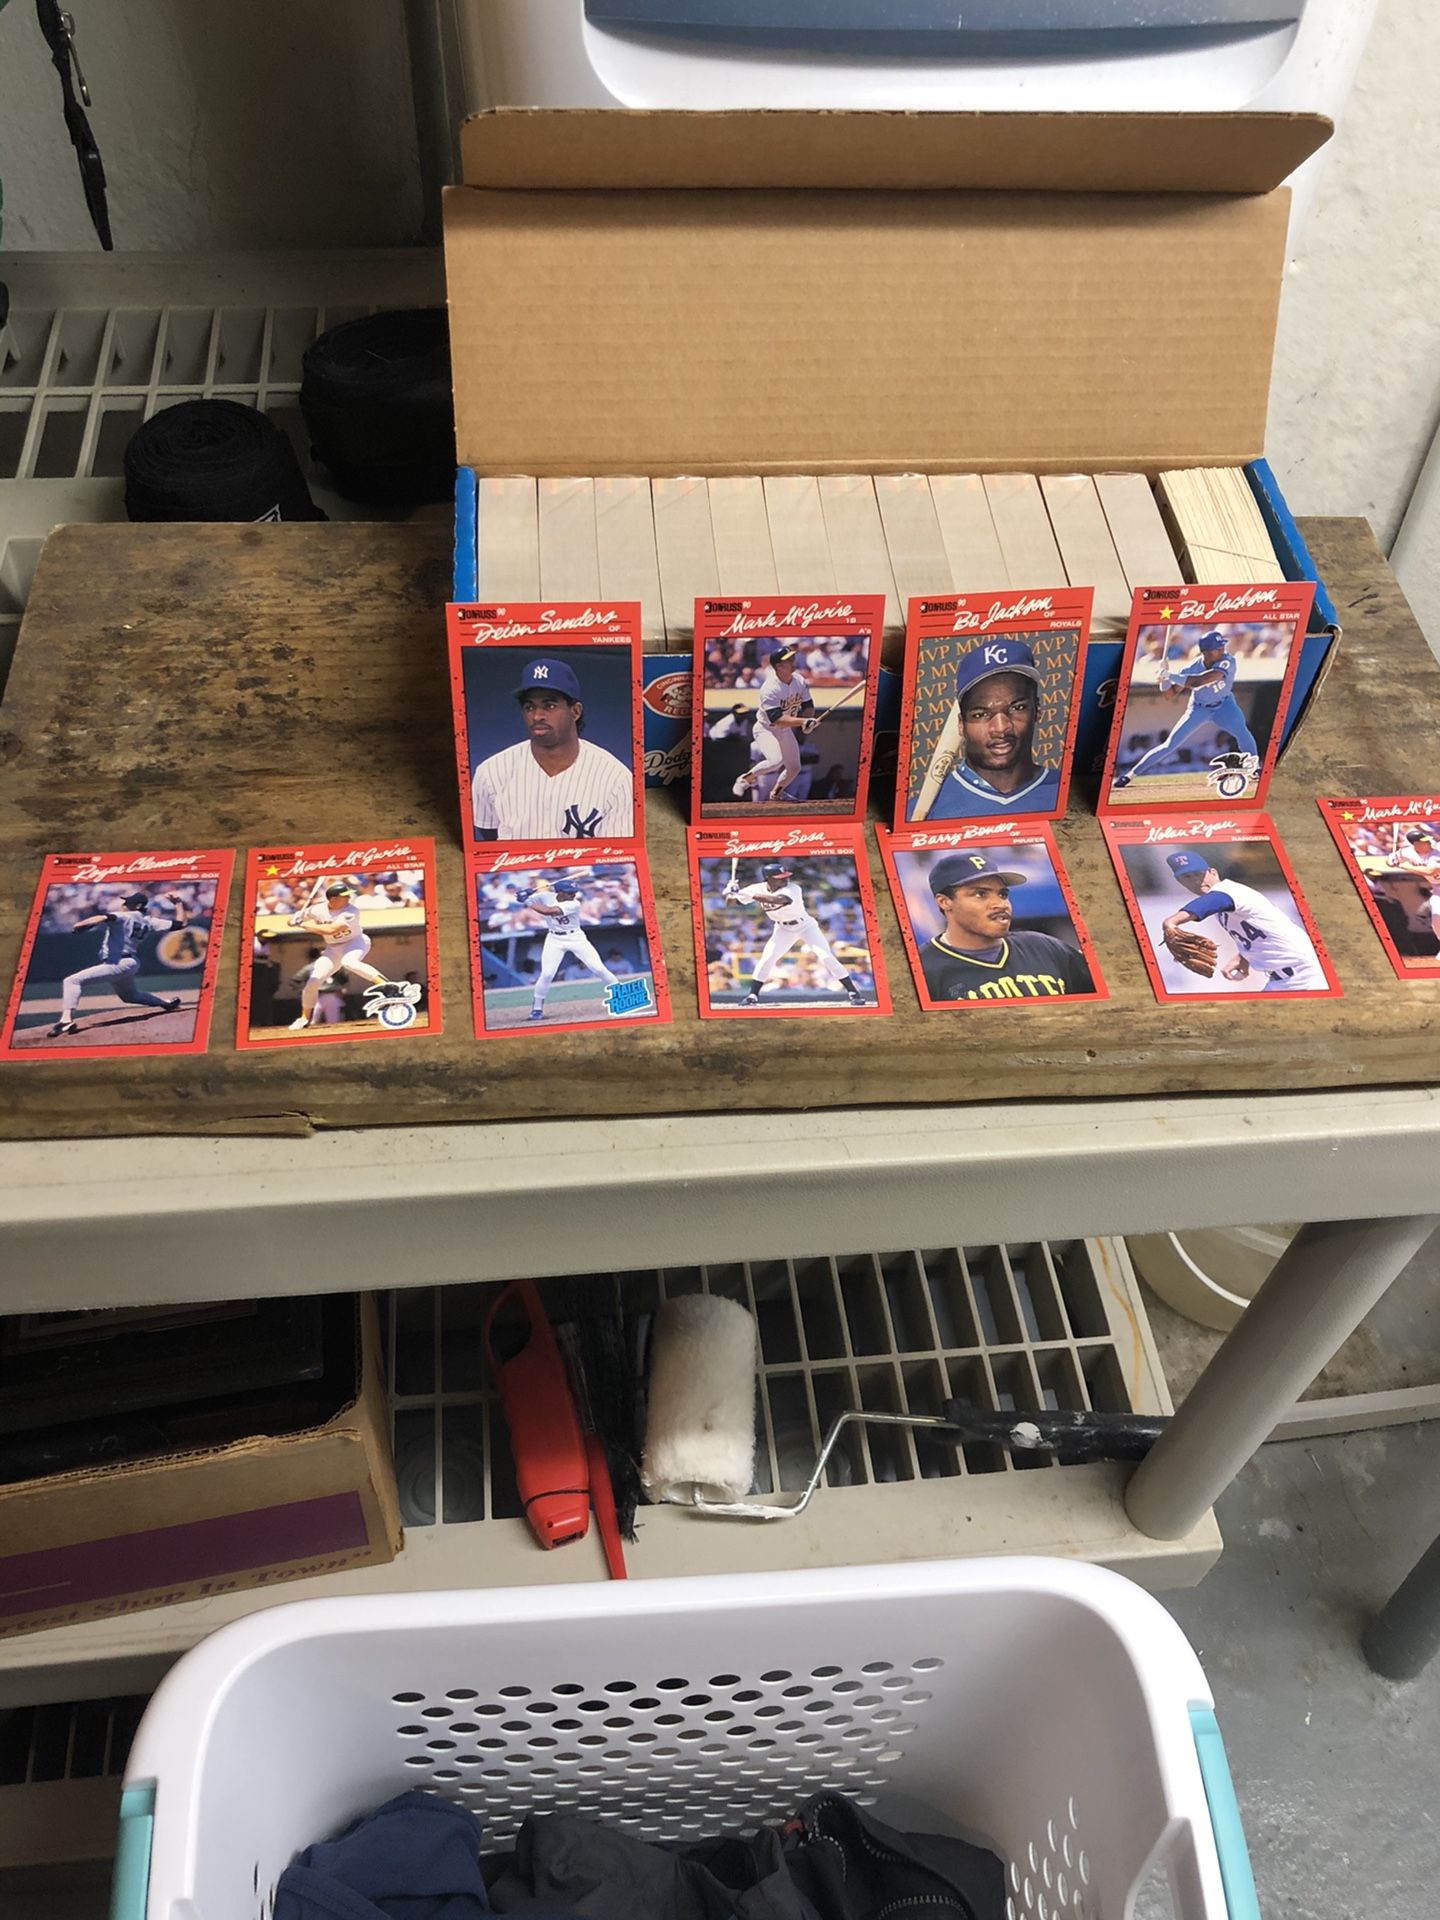 Complete sealed set of 1988 Donruss baseball cards PLUS 10 cards from 1989 in perfect Condition.